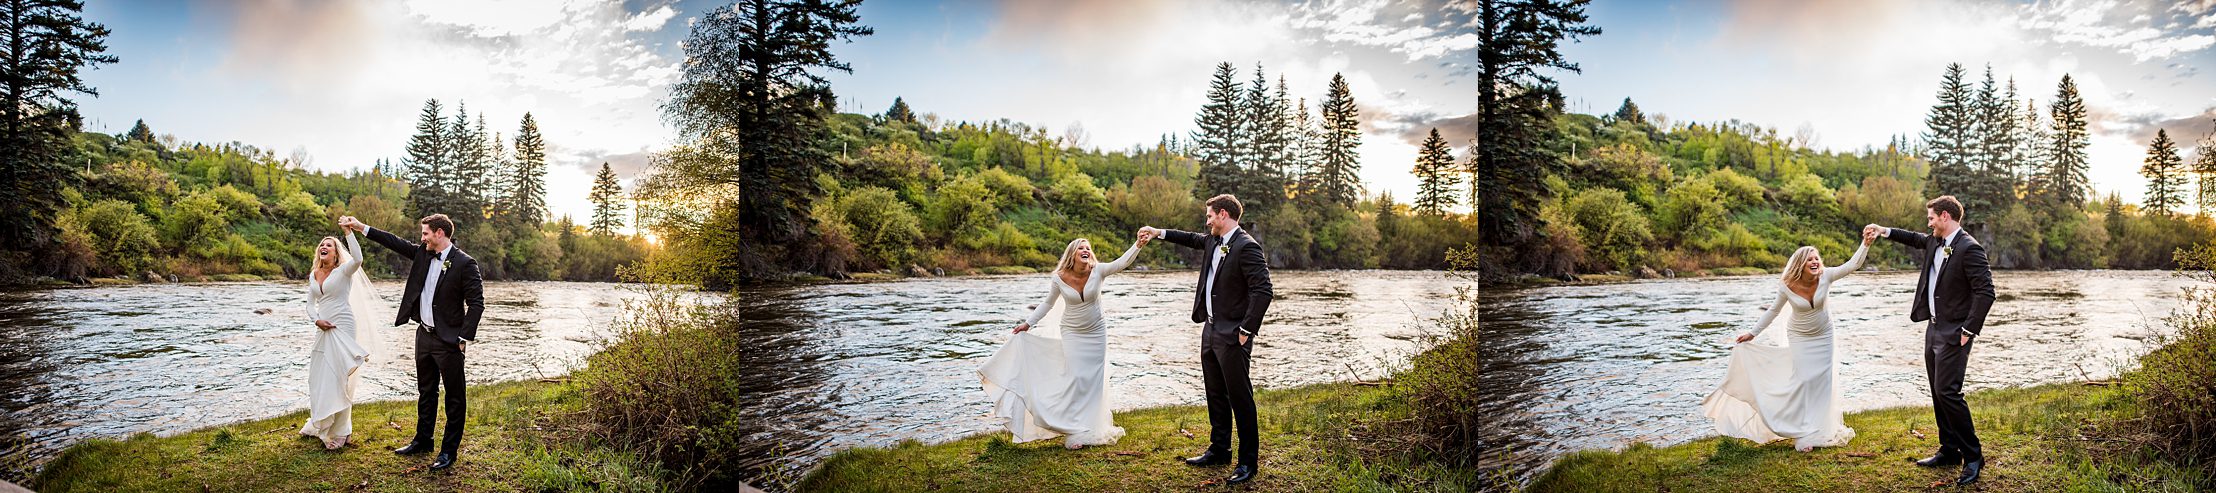 groom spins his bride with the trees and river behind them